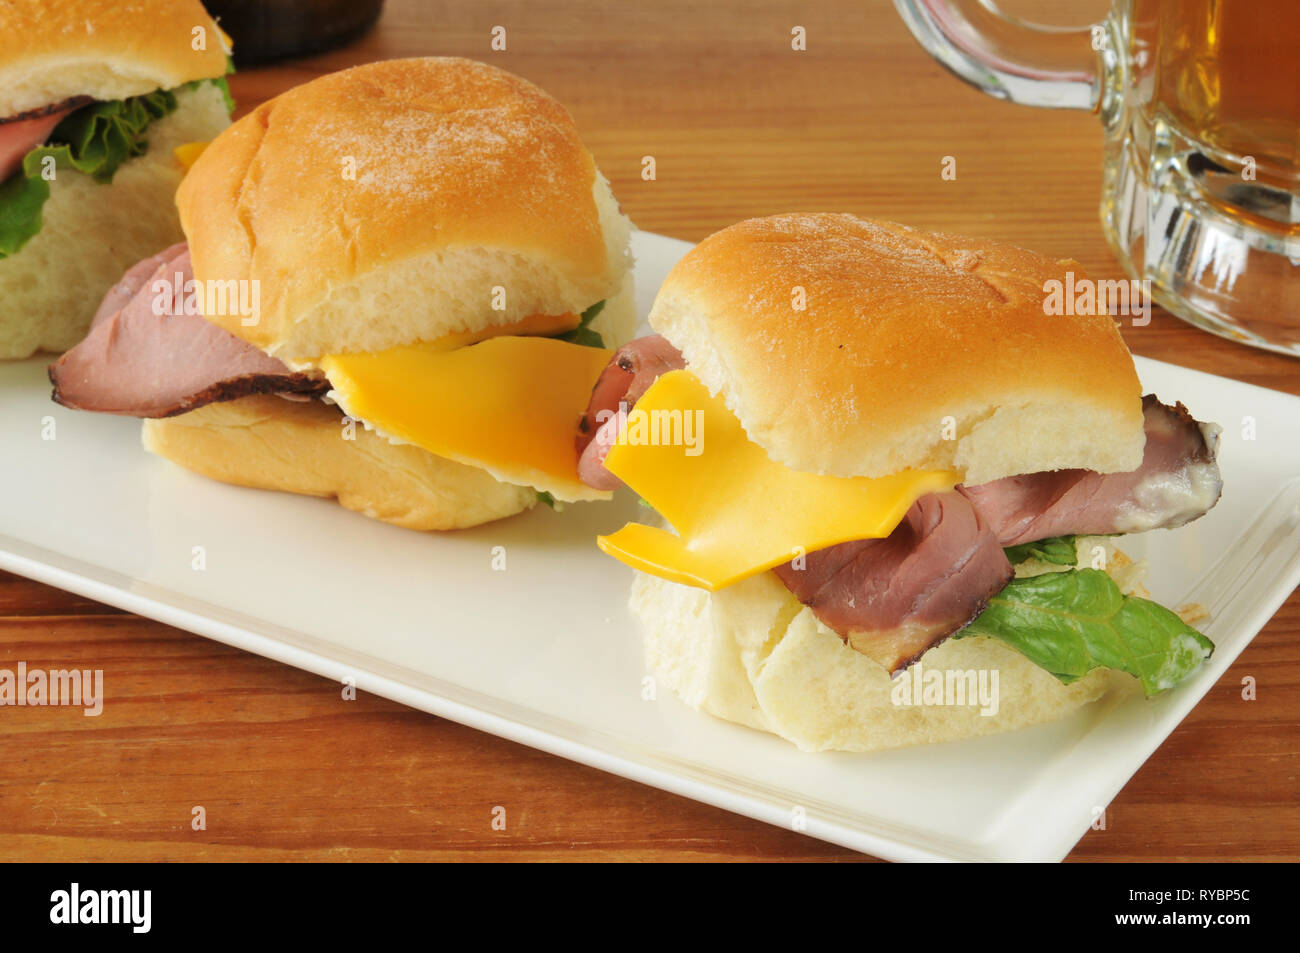 Roast beef sliders and beer on a bar counter Stock Photo